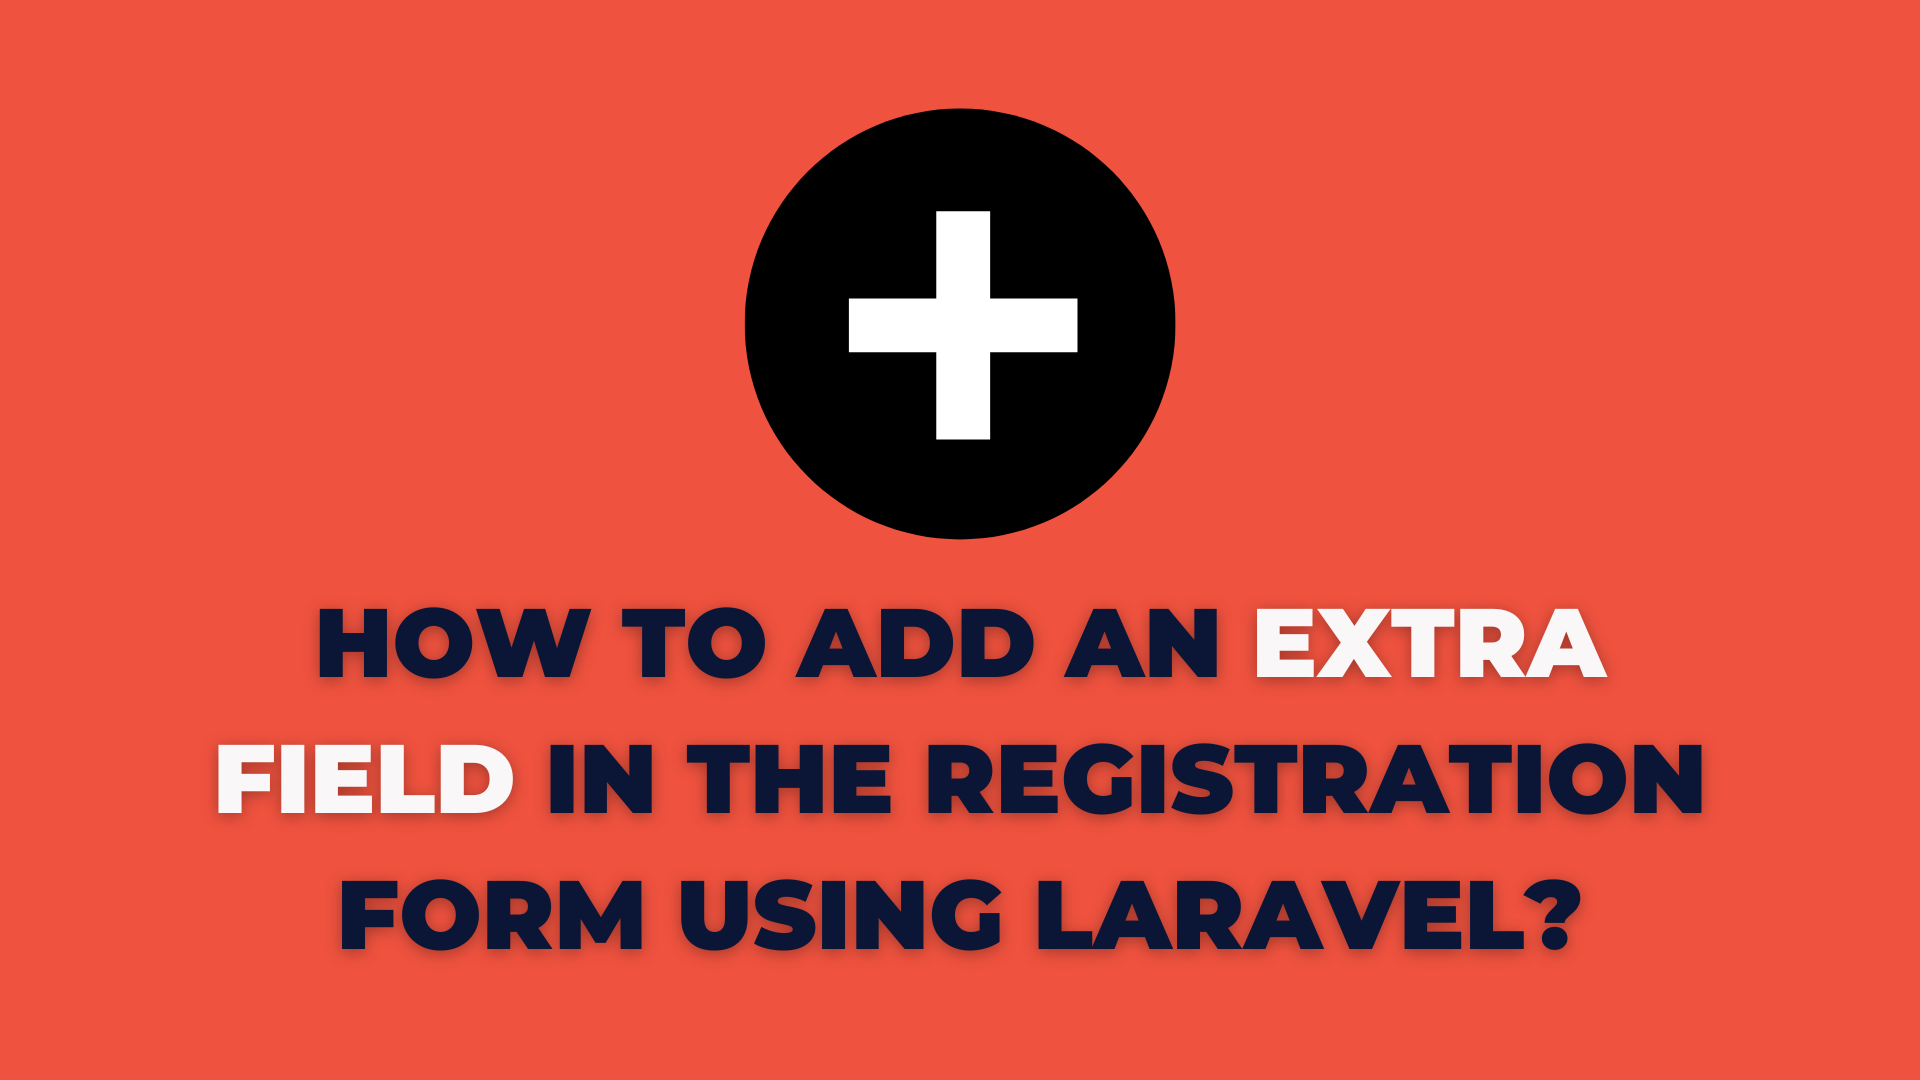 How to Add an Extra Field in the Registration Form using Laravel?